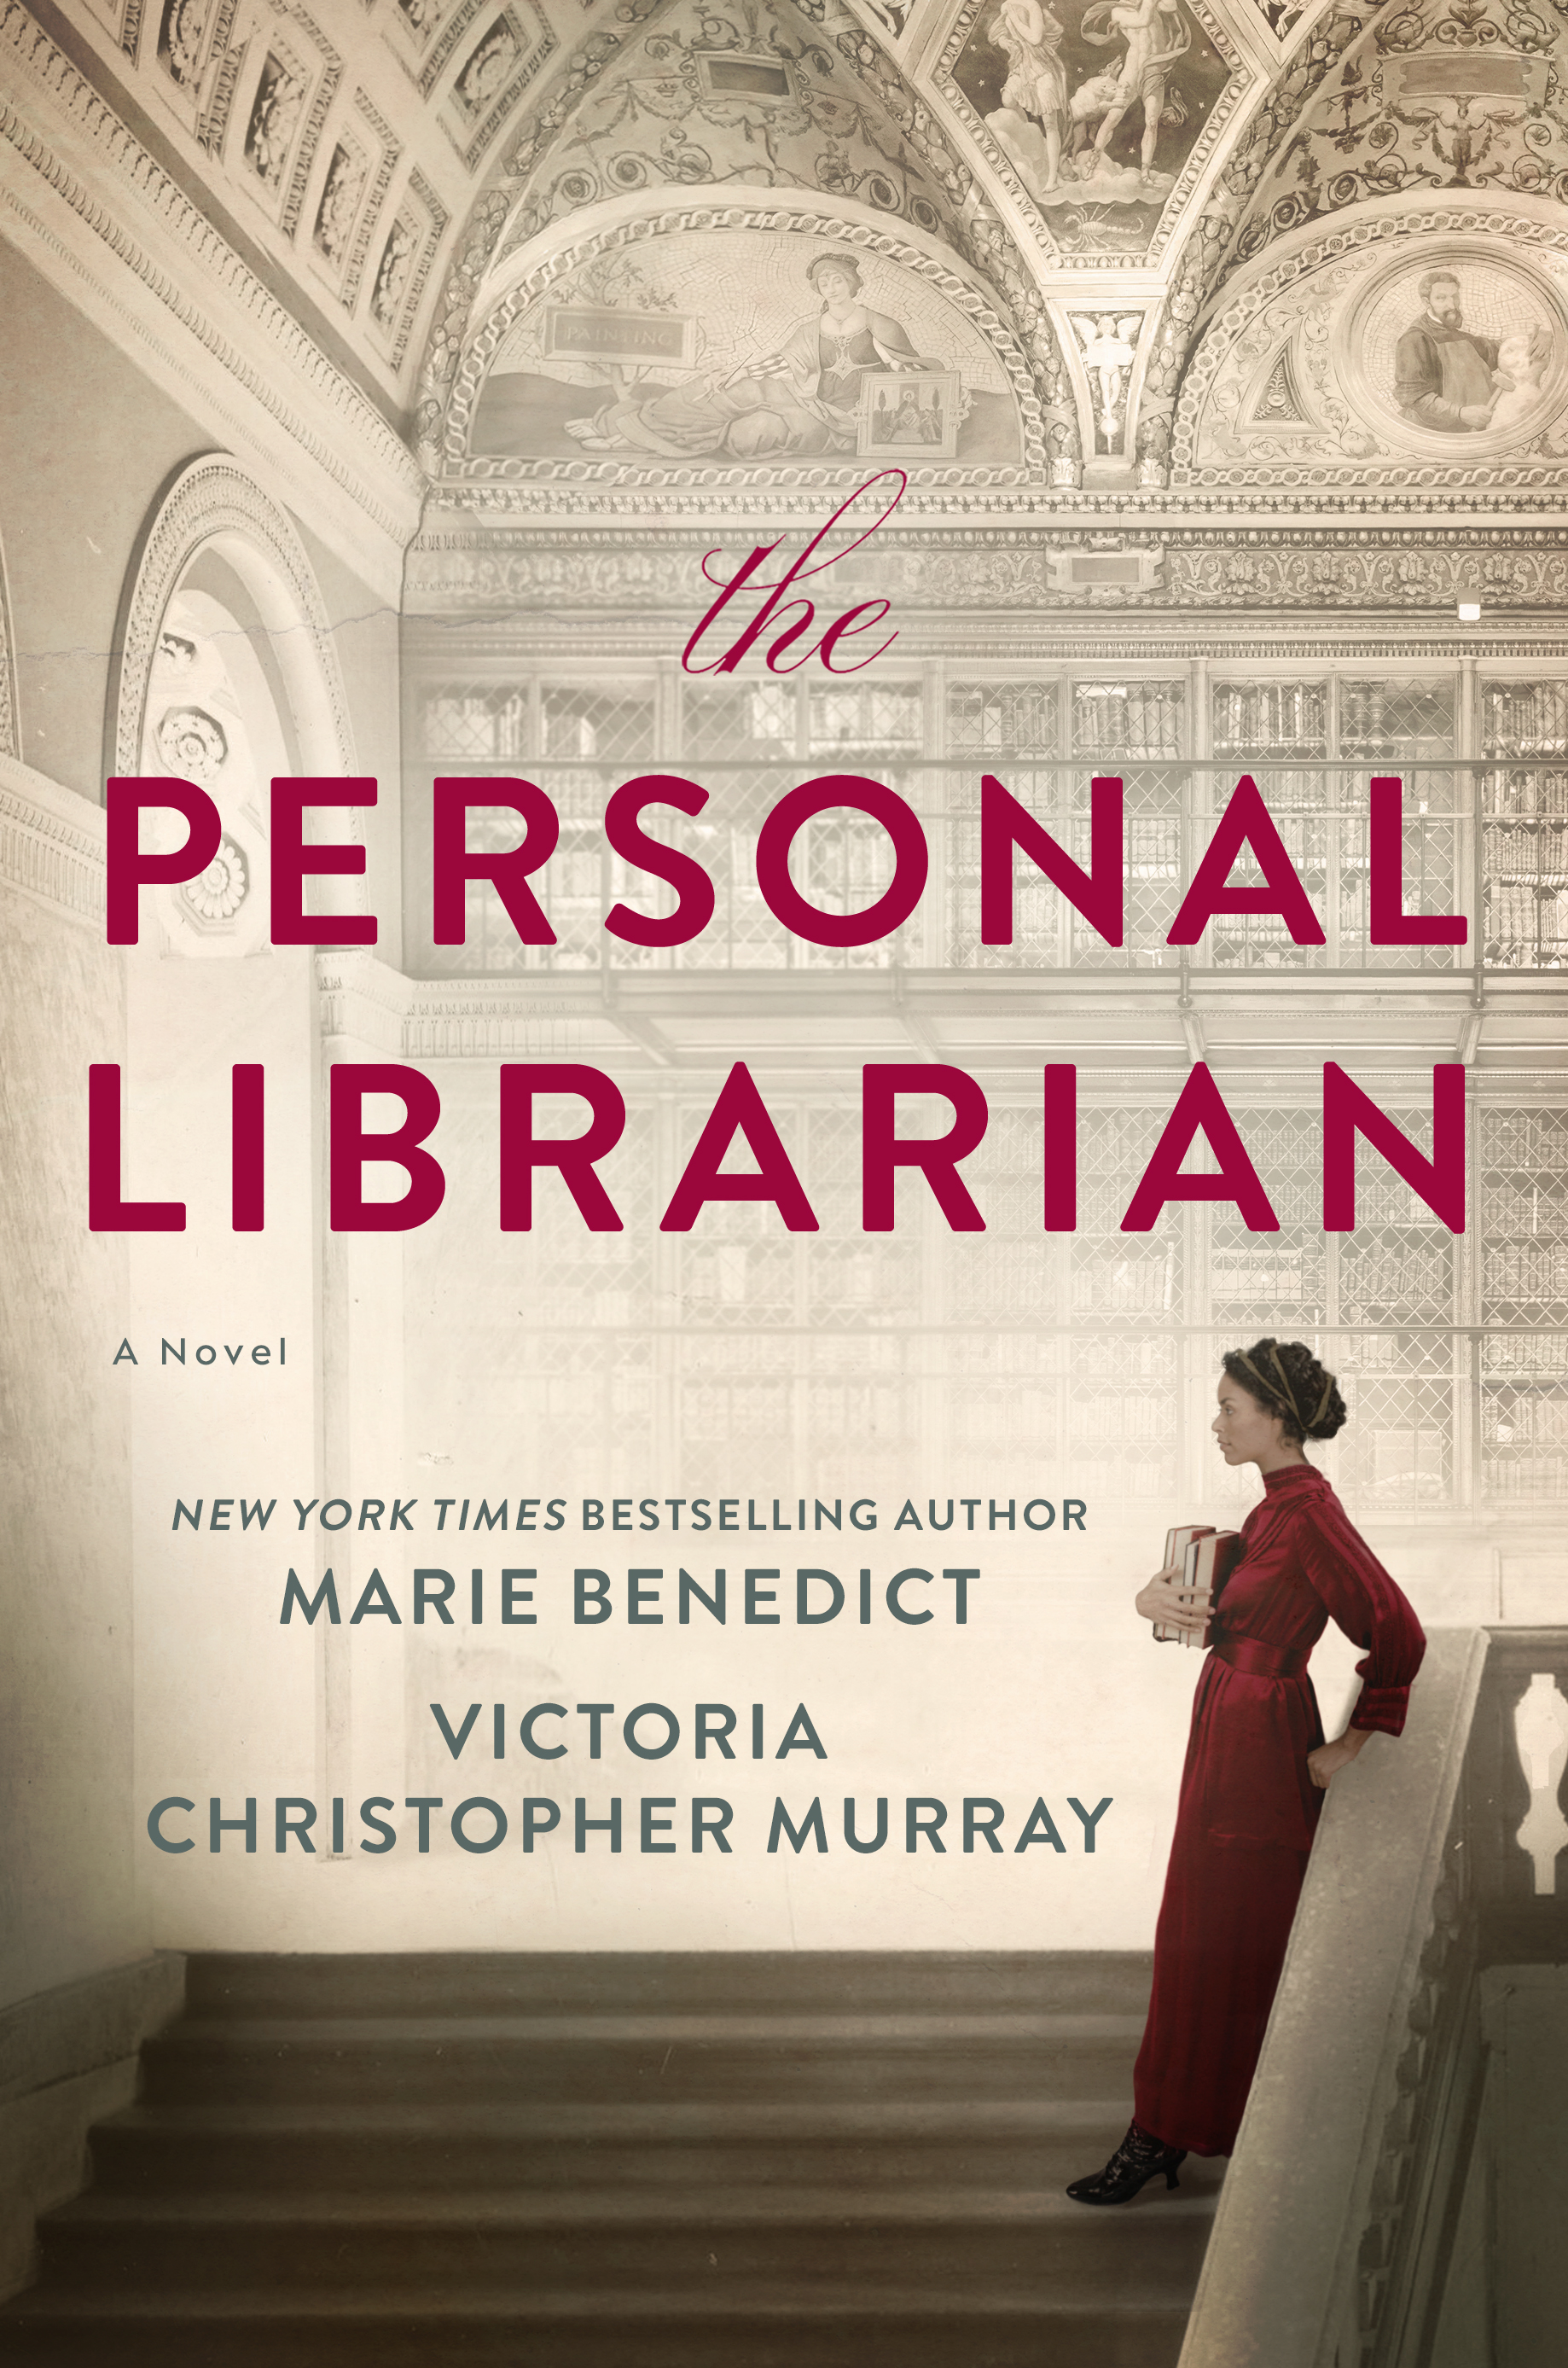 The Personal Librarian by Marie Benedict and Victoria Christopher Murray book cover